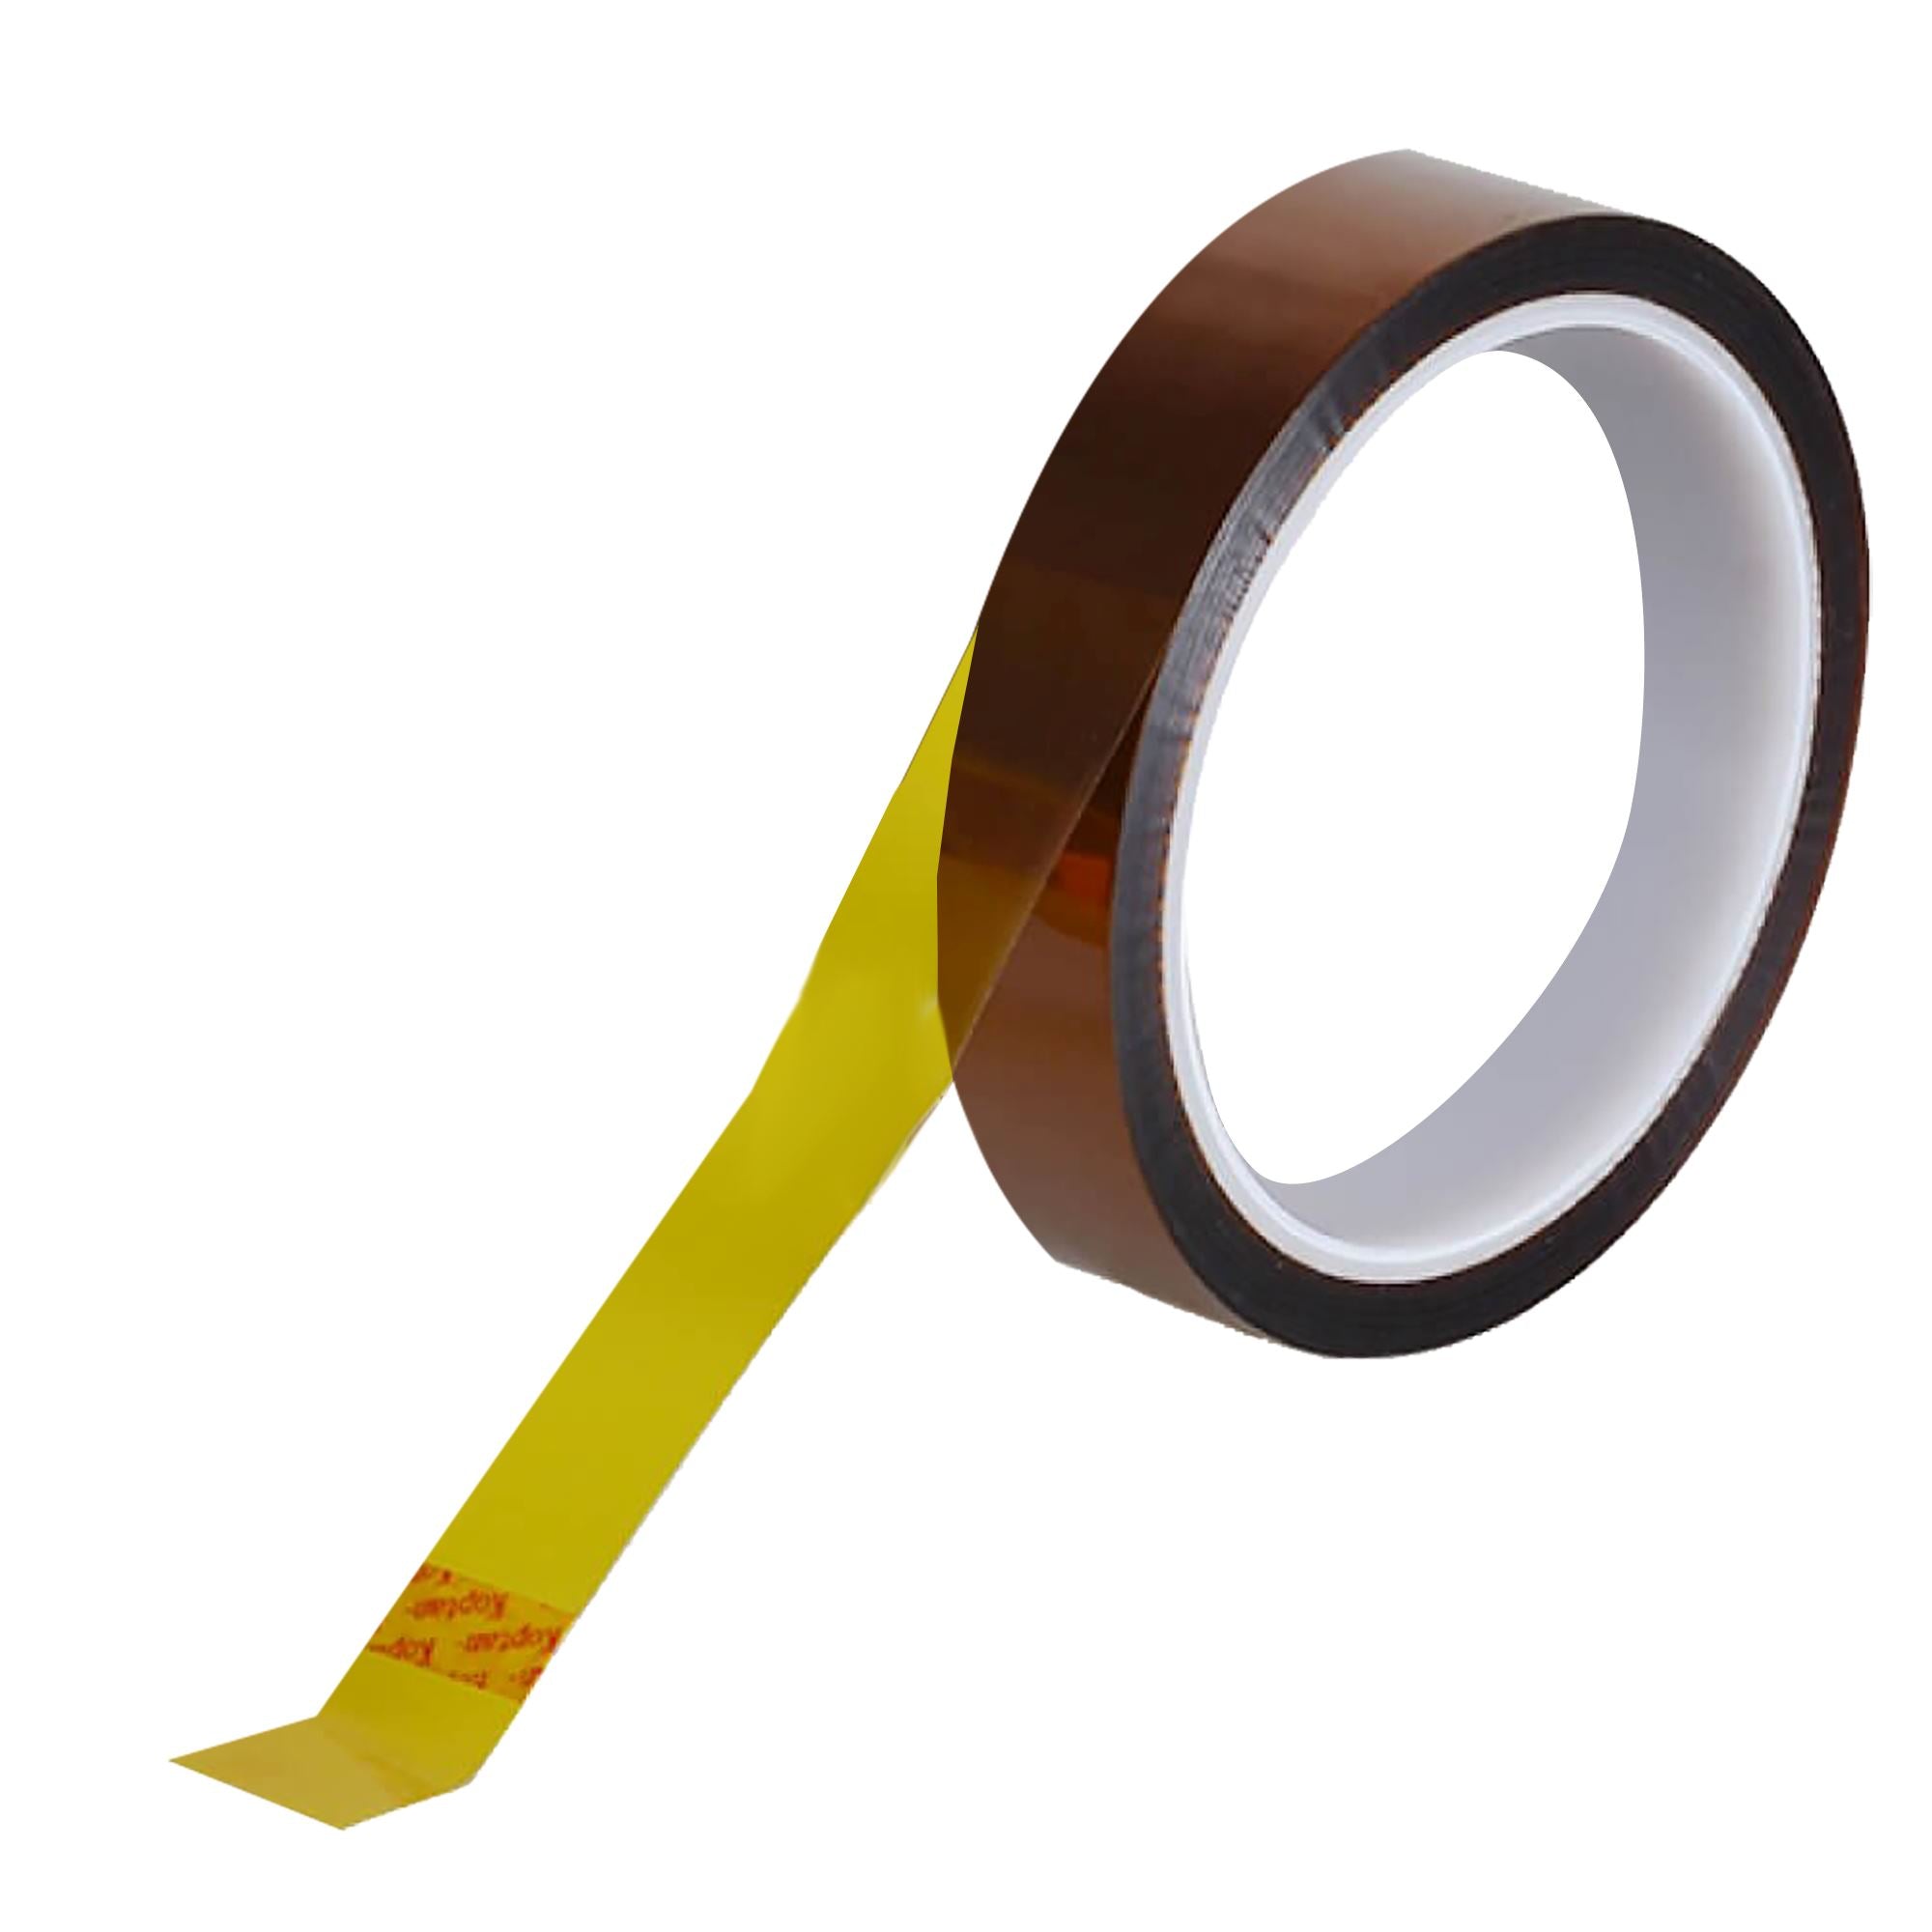 Sublimation Tape for Heat Transfer - Pack of 3 rolls